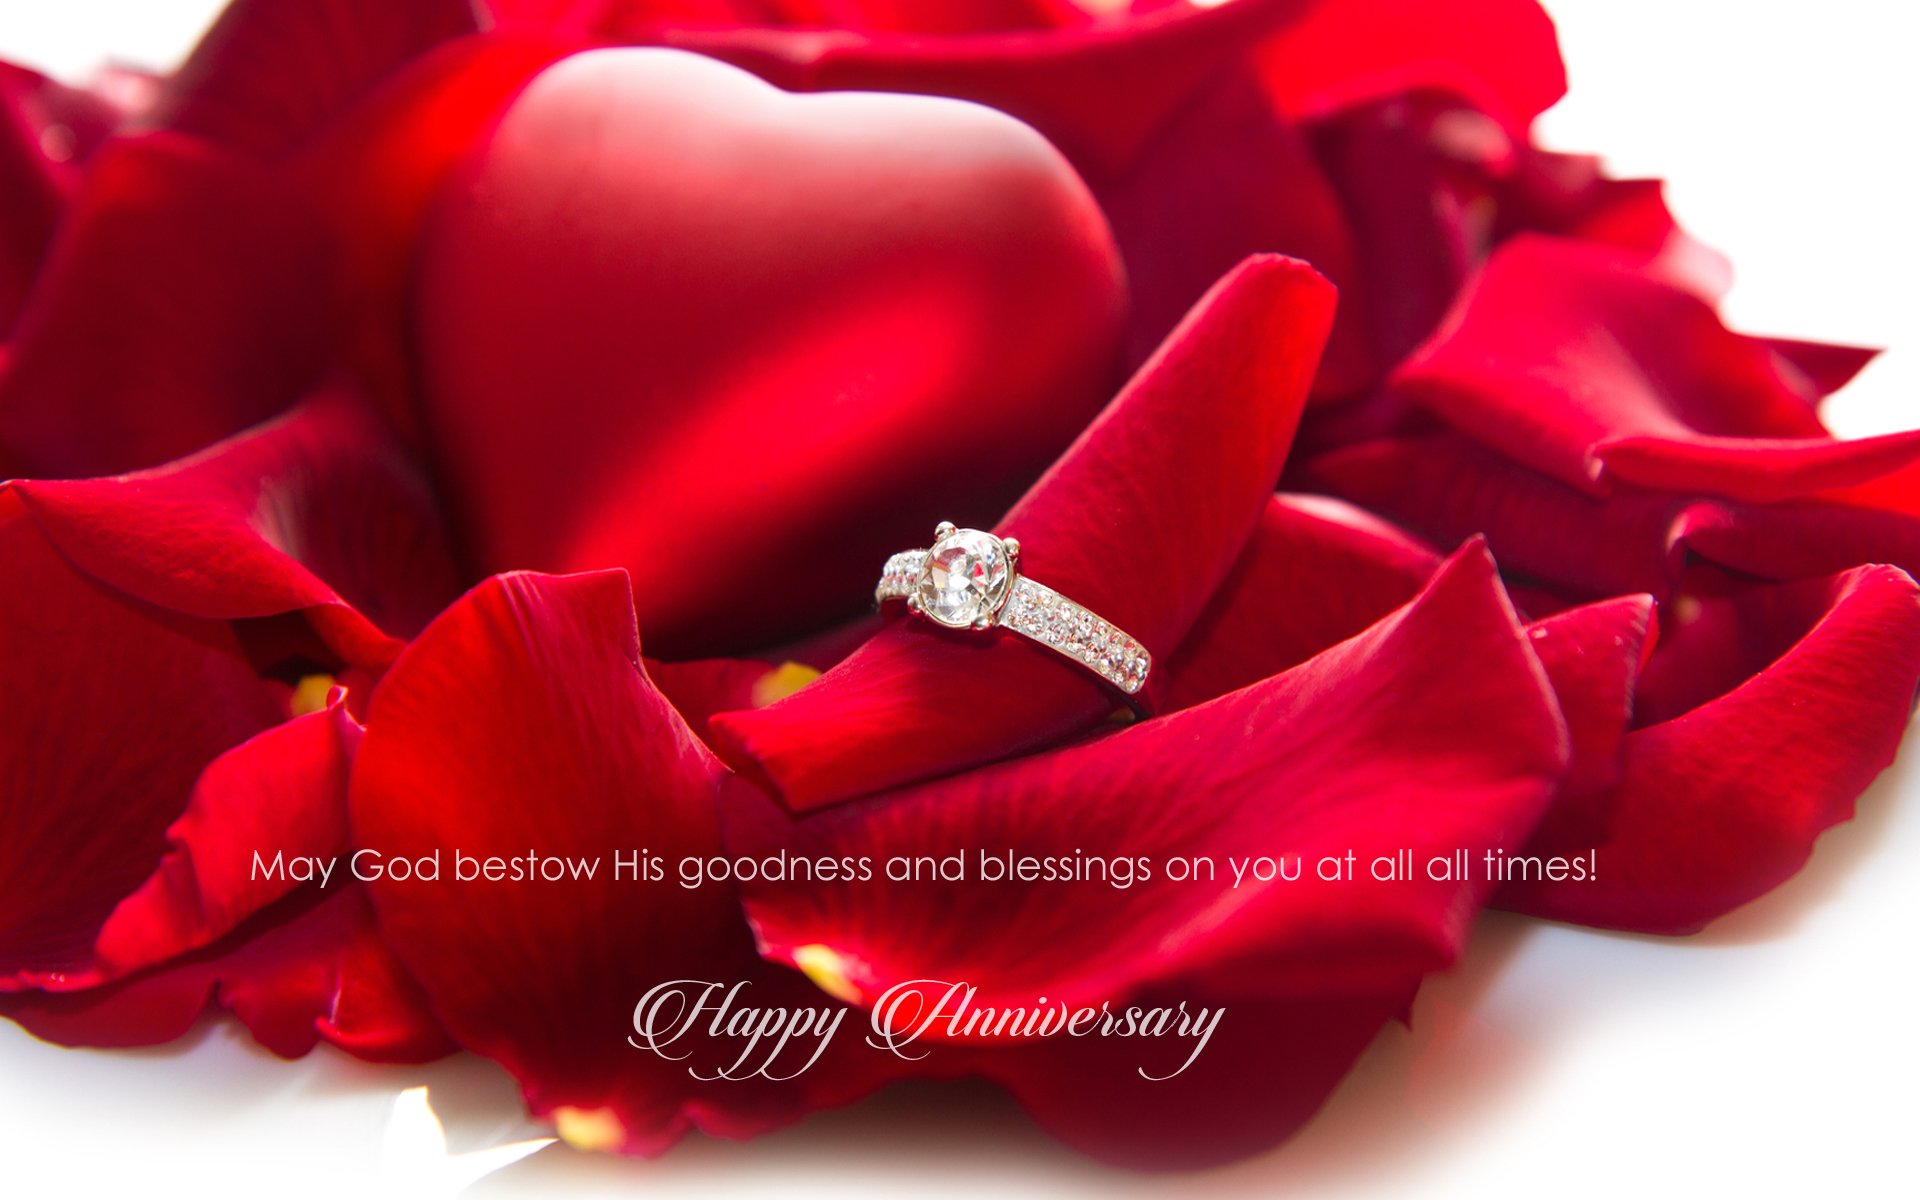 Download Flower Ring Heart Holiday Anniversary HD Wallpaper